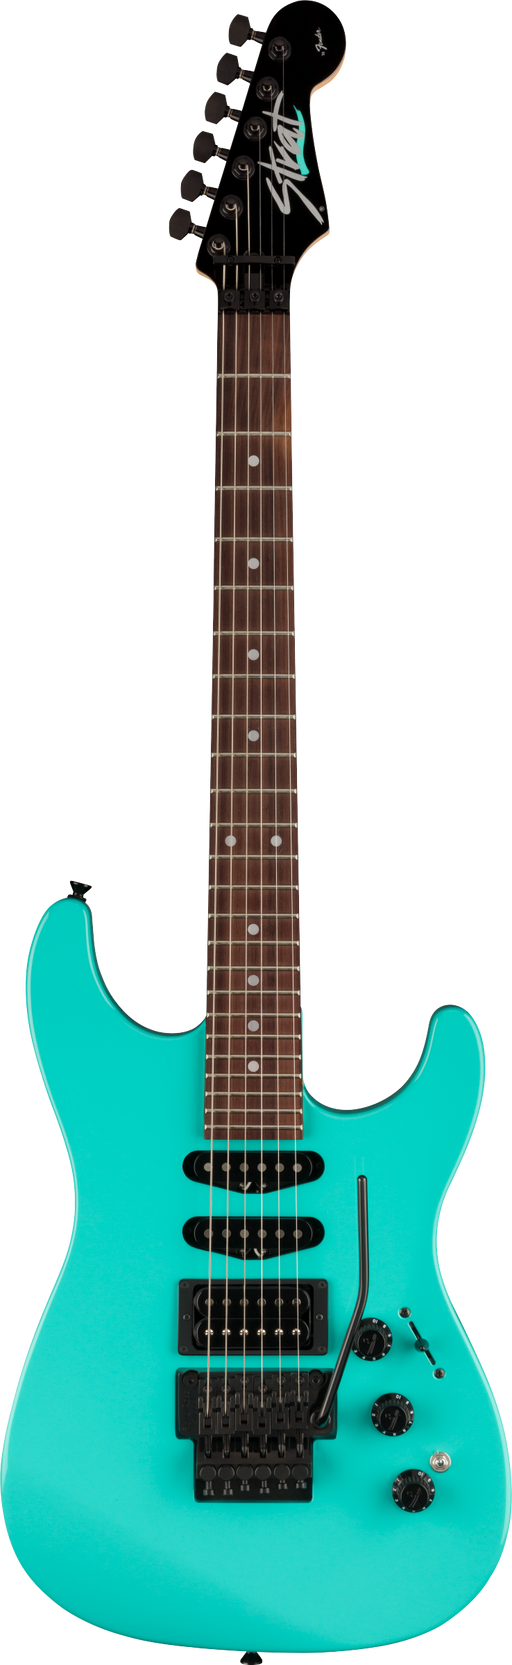 Fender Limited Edition HM Strat Rosewood Fingerboard Ice Blue Electric Guitar